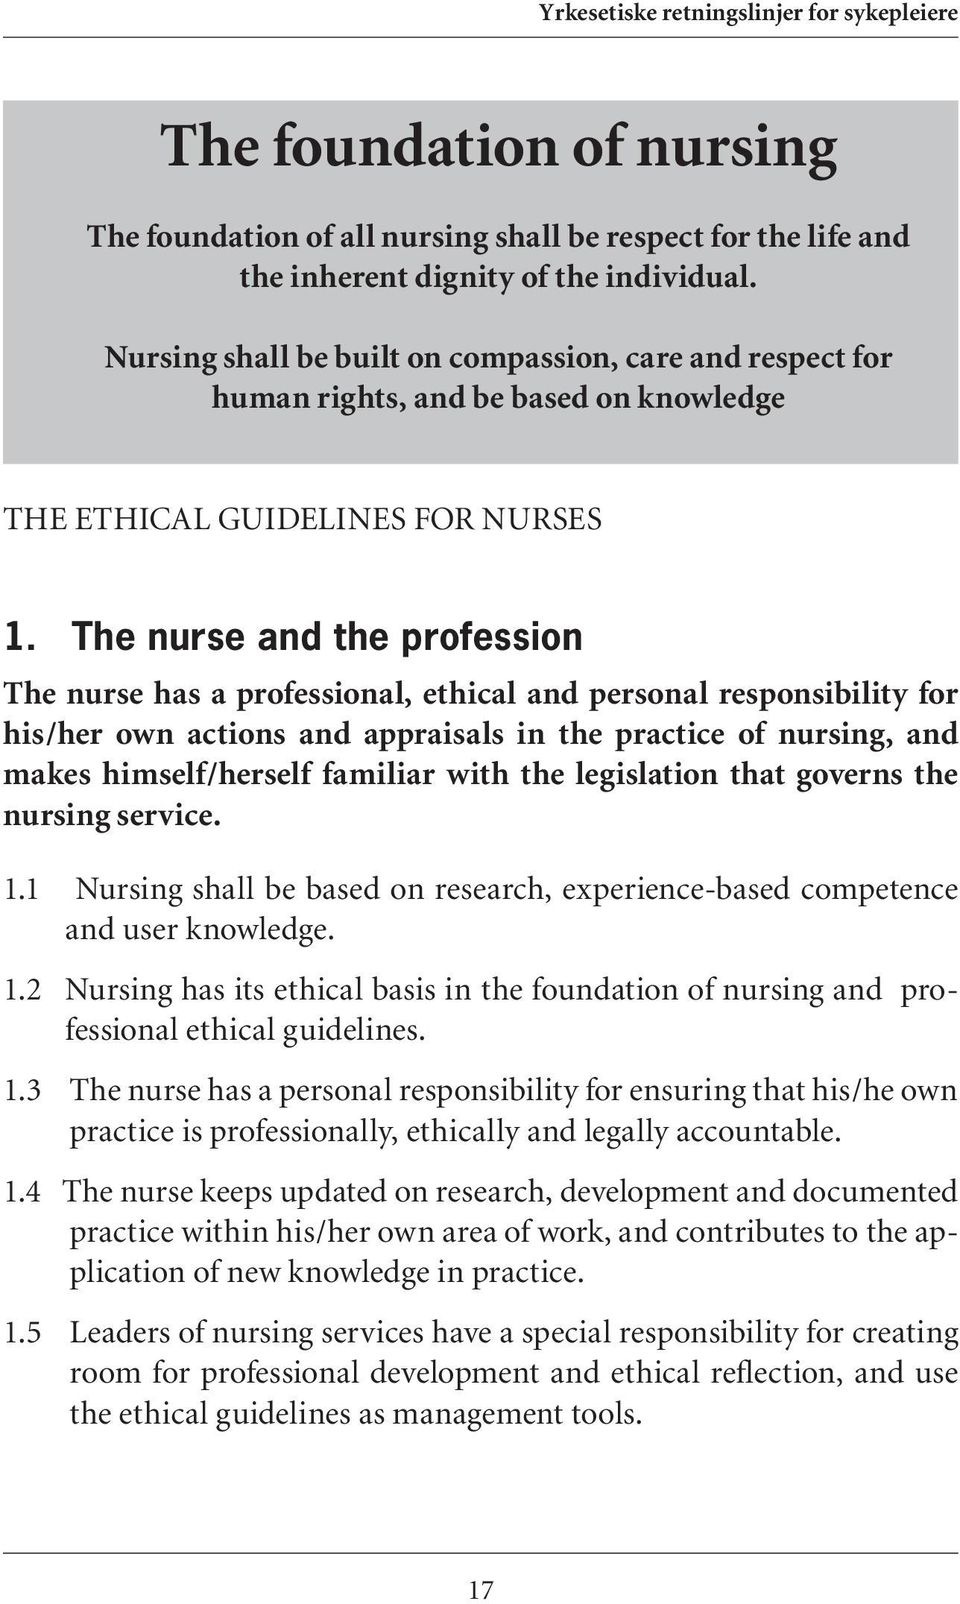 The nurse and the profession The nurse has a professional, ethical and personal responsibility for his/her own actions and appraisals in the practice of nursing, and makes himself/herself familiar